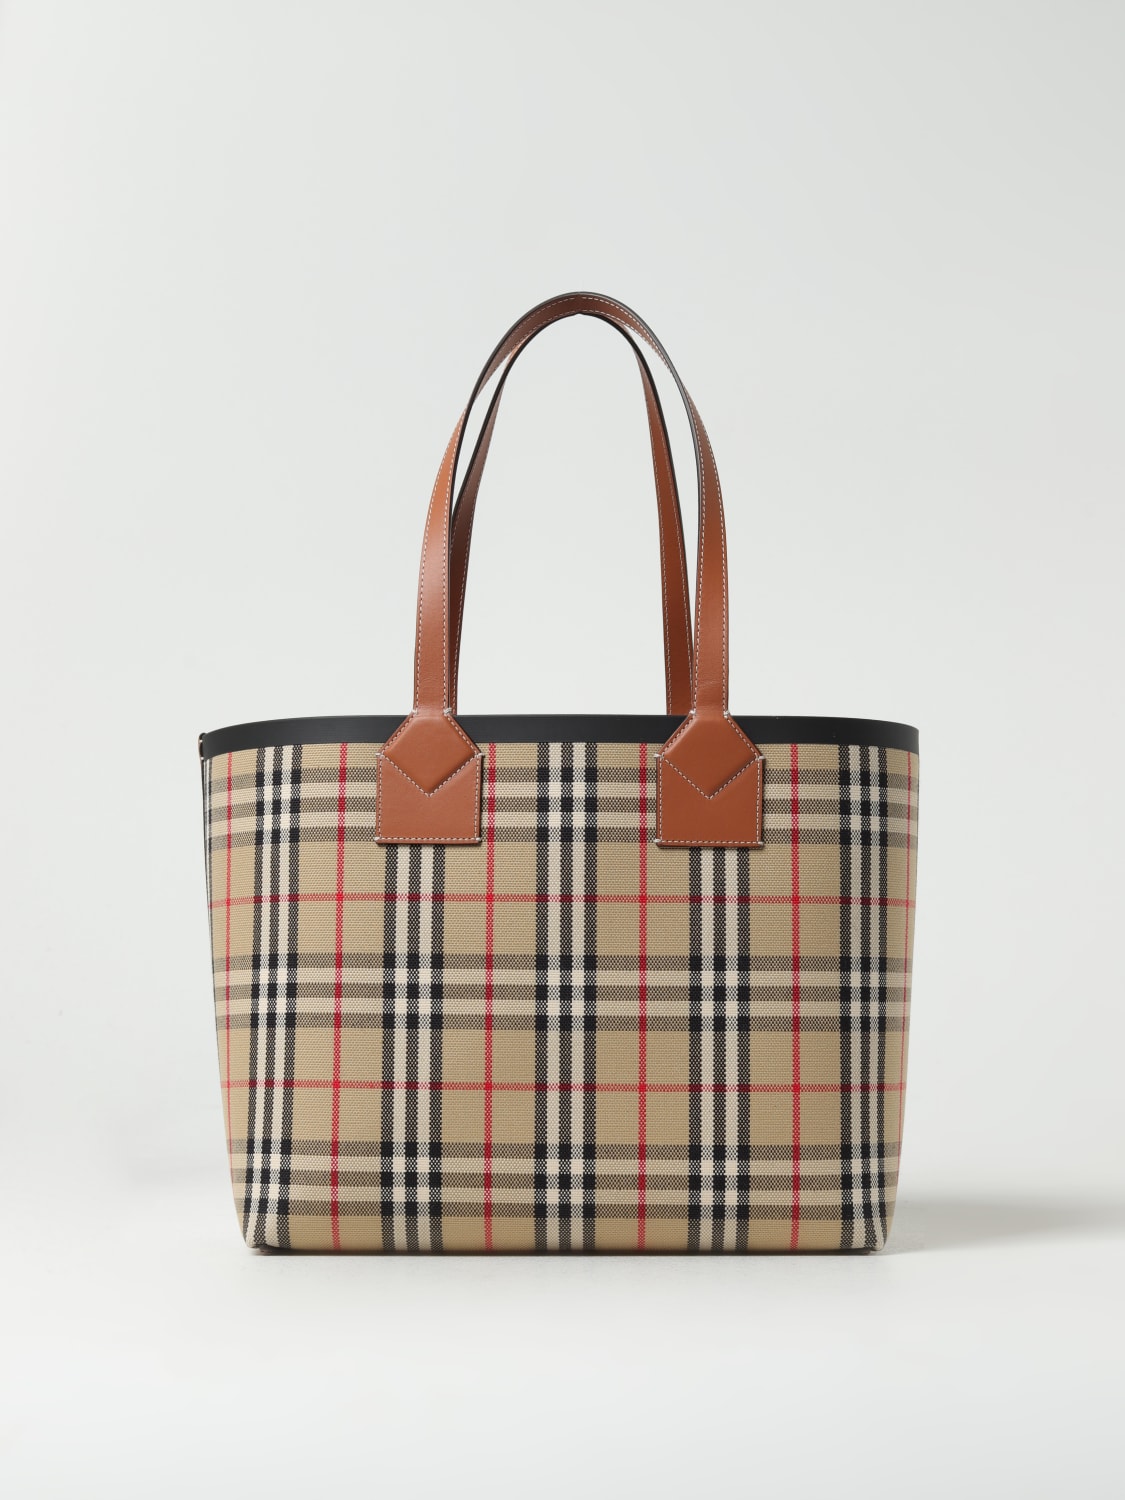 Burberry Briar Bag in Canvas Check and Leather